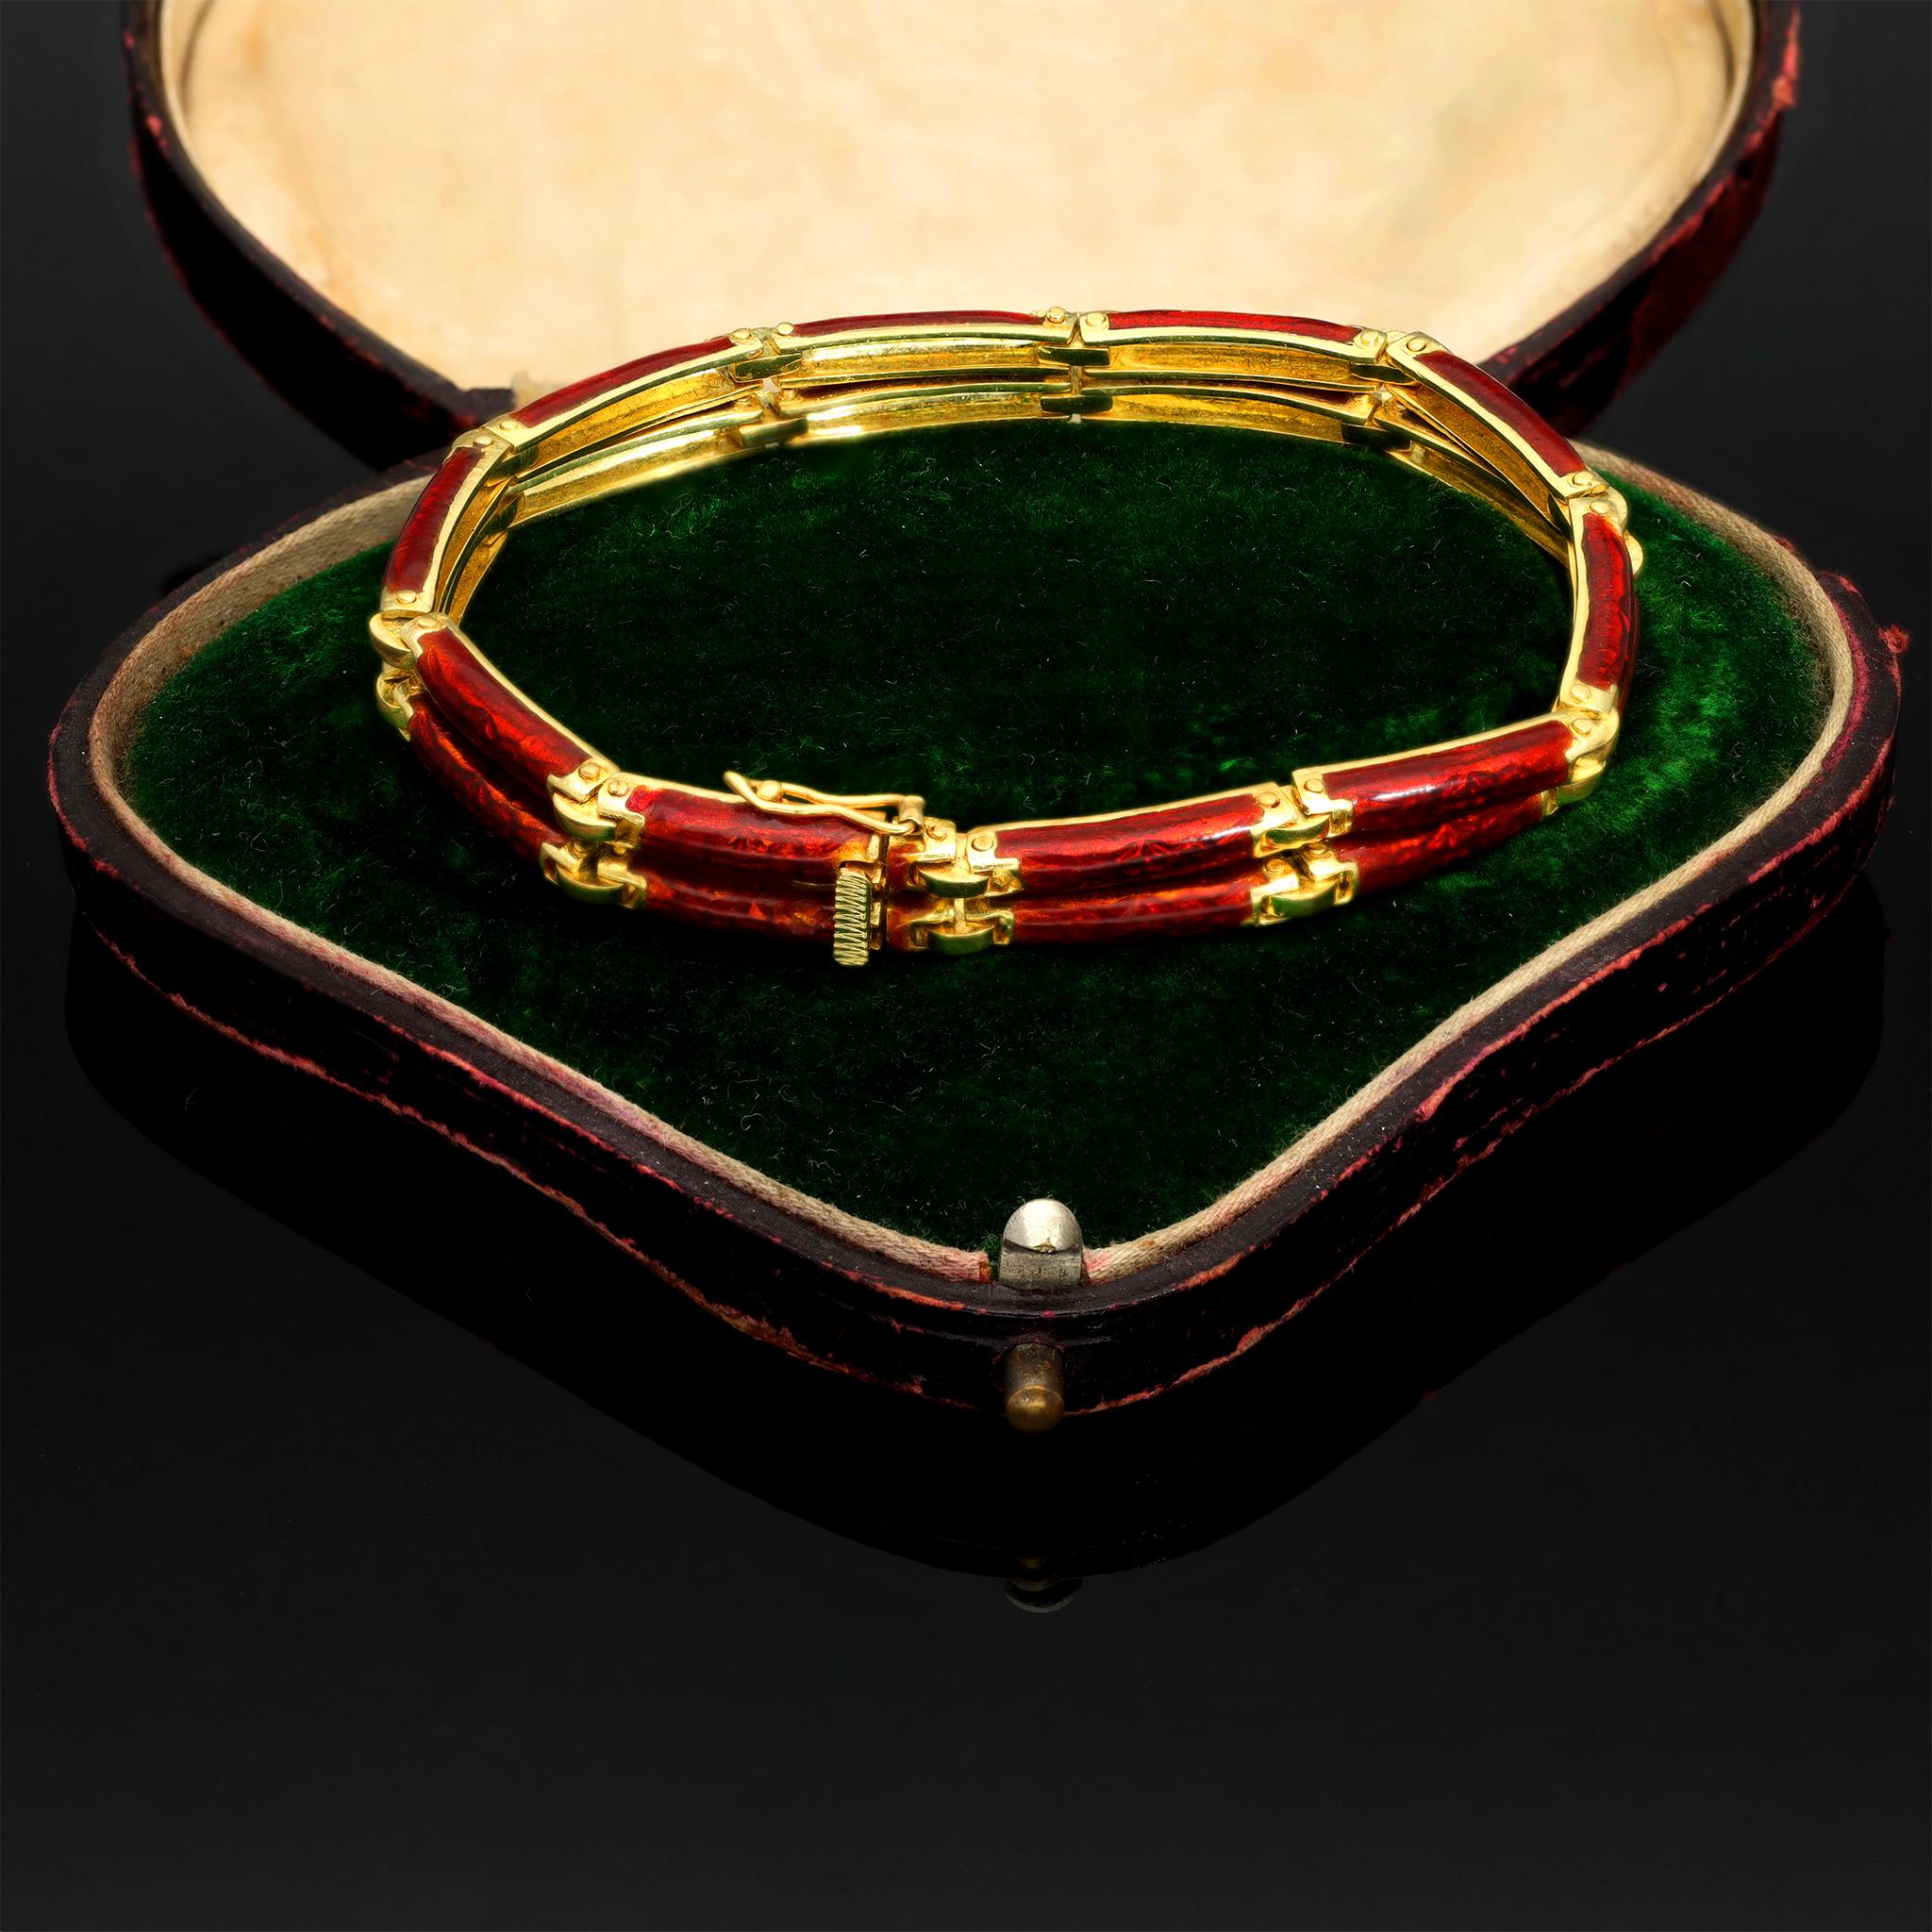 A perfect daily vintage Italian fancy red enamel bracelet! This solid 18k gold vintage bracelet is an absolute beauty! This rare fancy chain link bracelet is preserved in a superb state and will make a great addition to any vintage jewelry